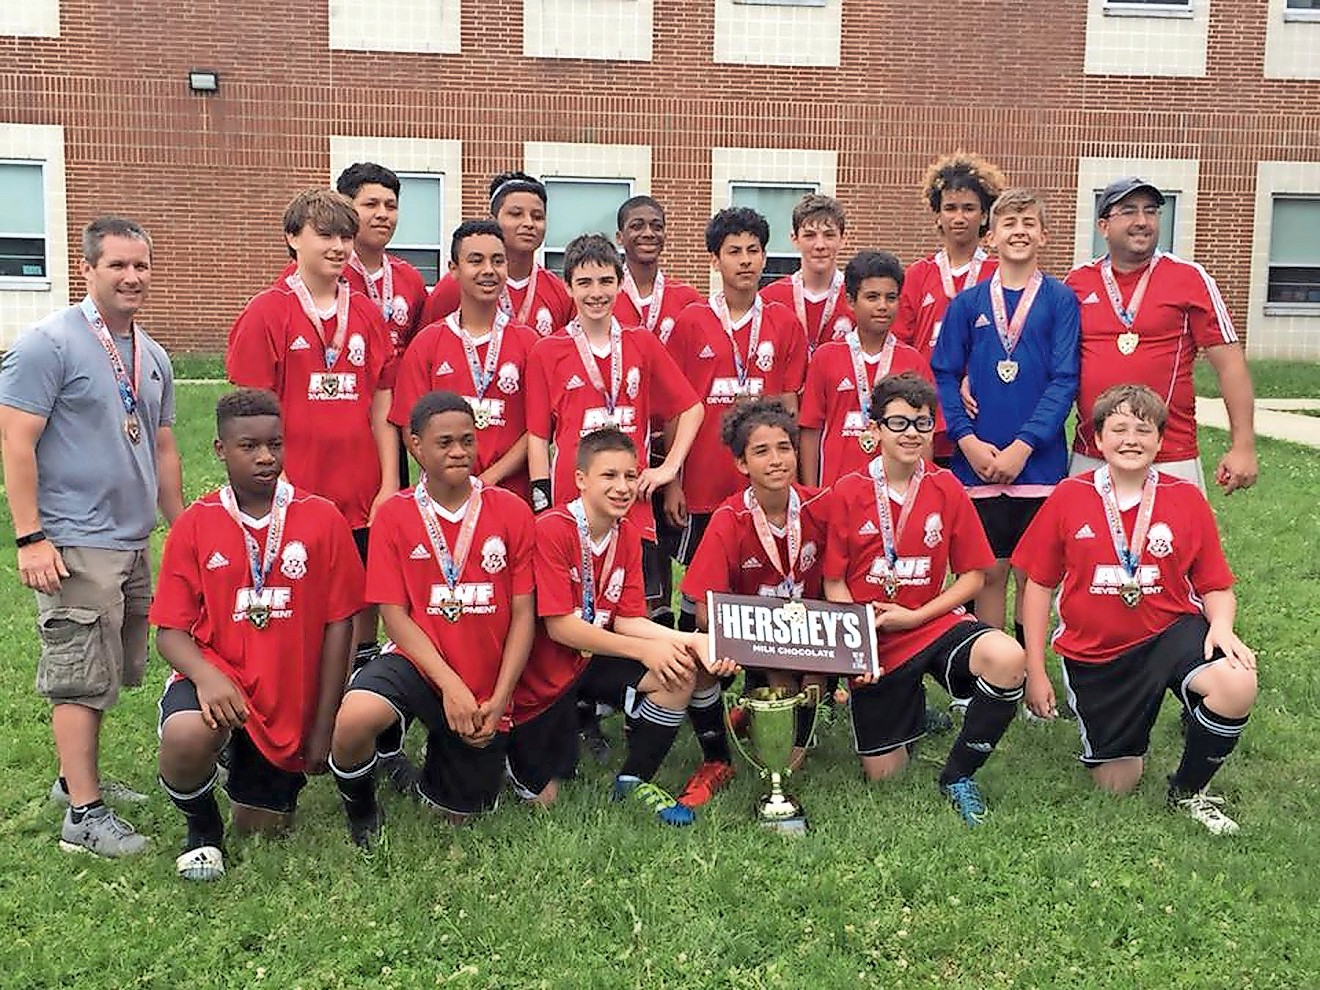 The West Hempstead Titans boys’ 14-and-under team tied for first place in their division.